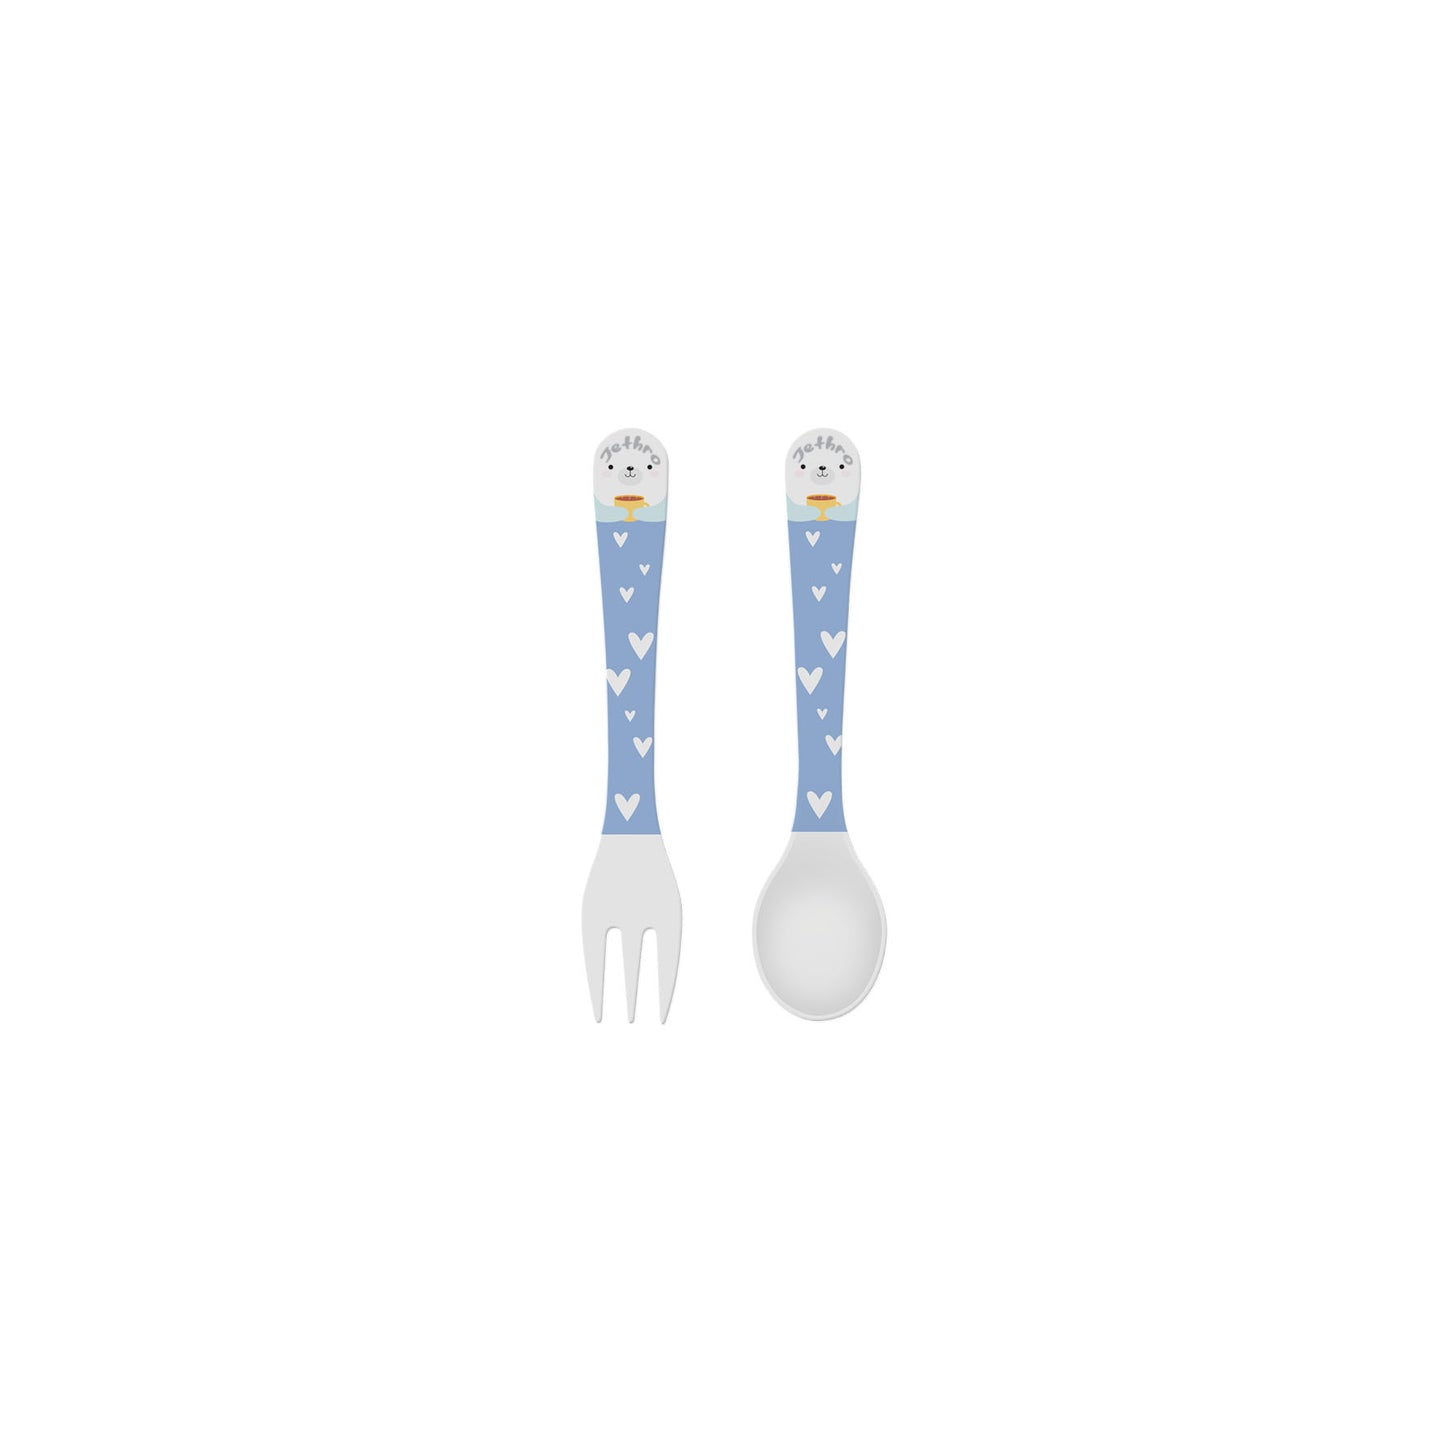 The Plate Story - 2 Pcs Personalized Kid’s Cutlery Set – Bunny